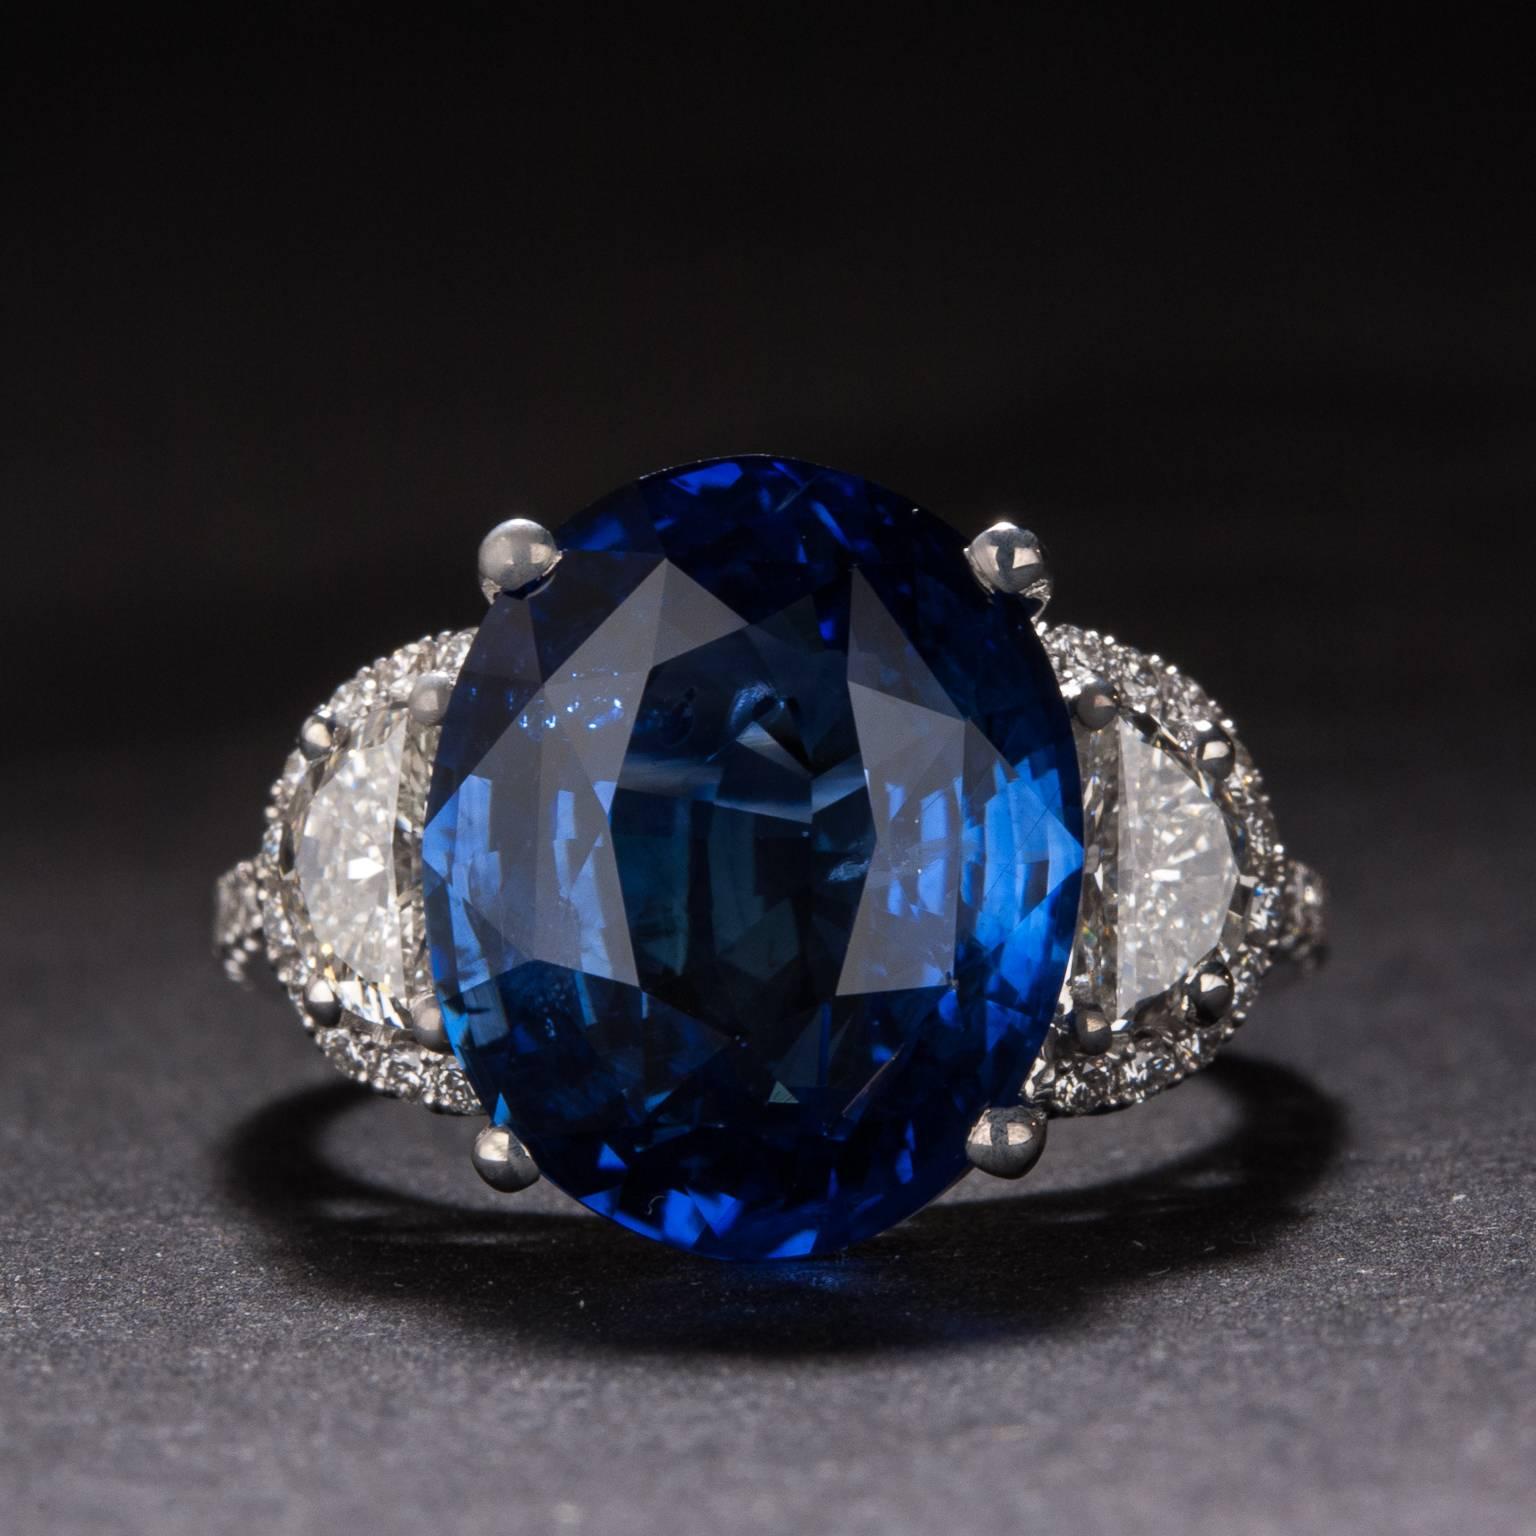 A gorgeous ring with an absolutely stunning 10.22 carat Sapphire at its center. The center sapphire is flanked by 1.01 total carats of diamonds and the mounting is crafted in 18k white gold.

This ring is size 6.5, although it may be sized to fit.